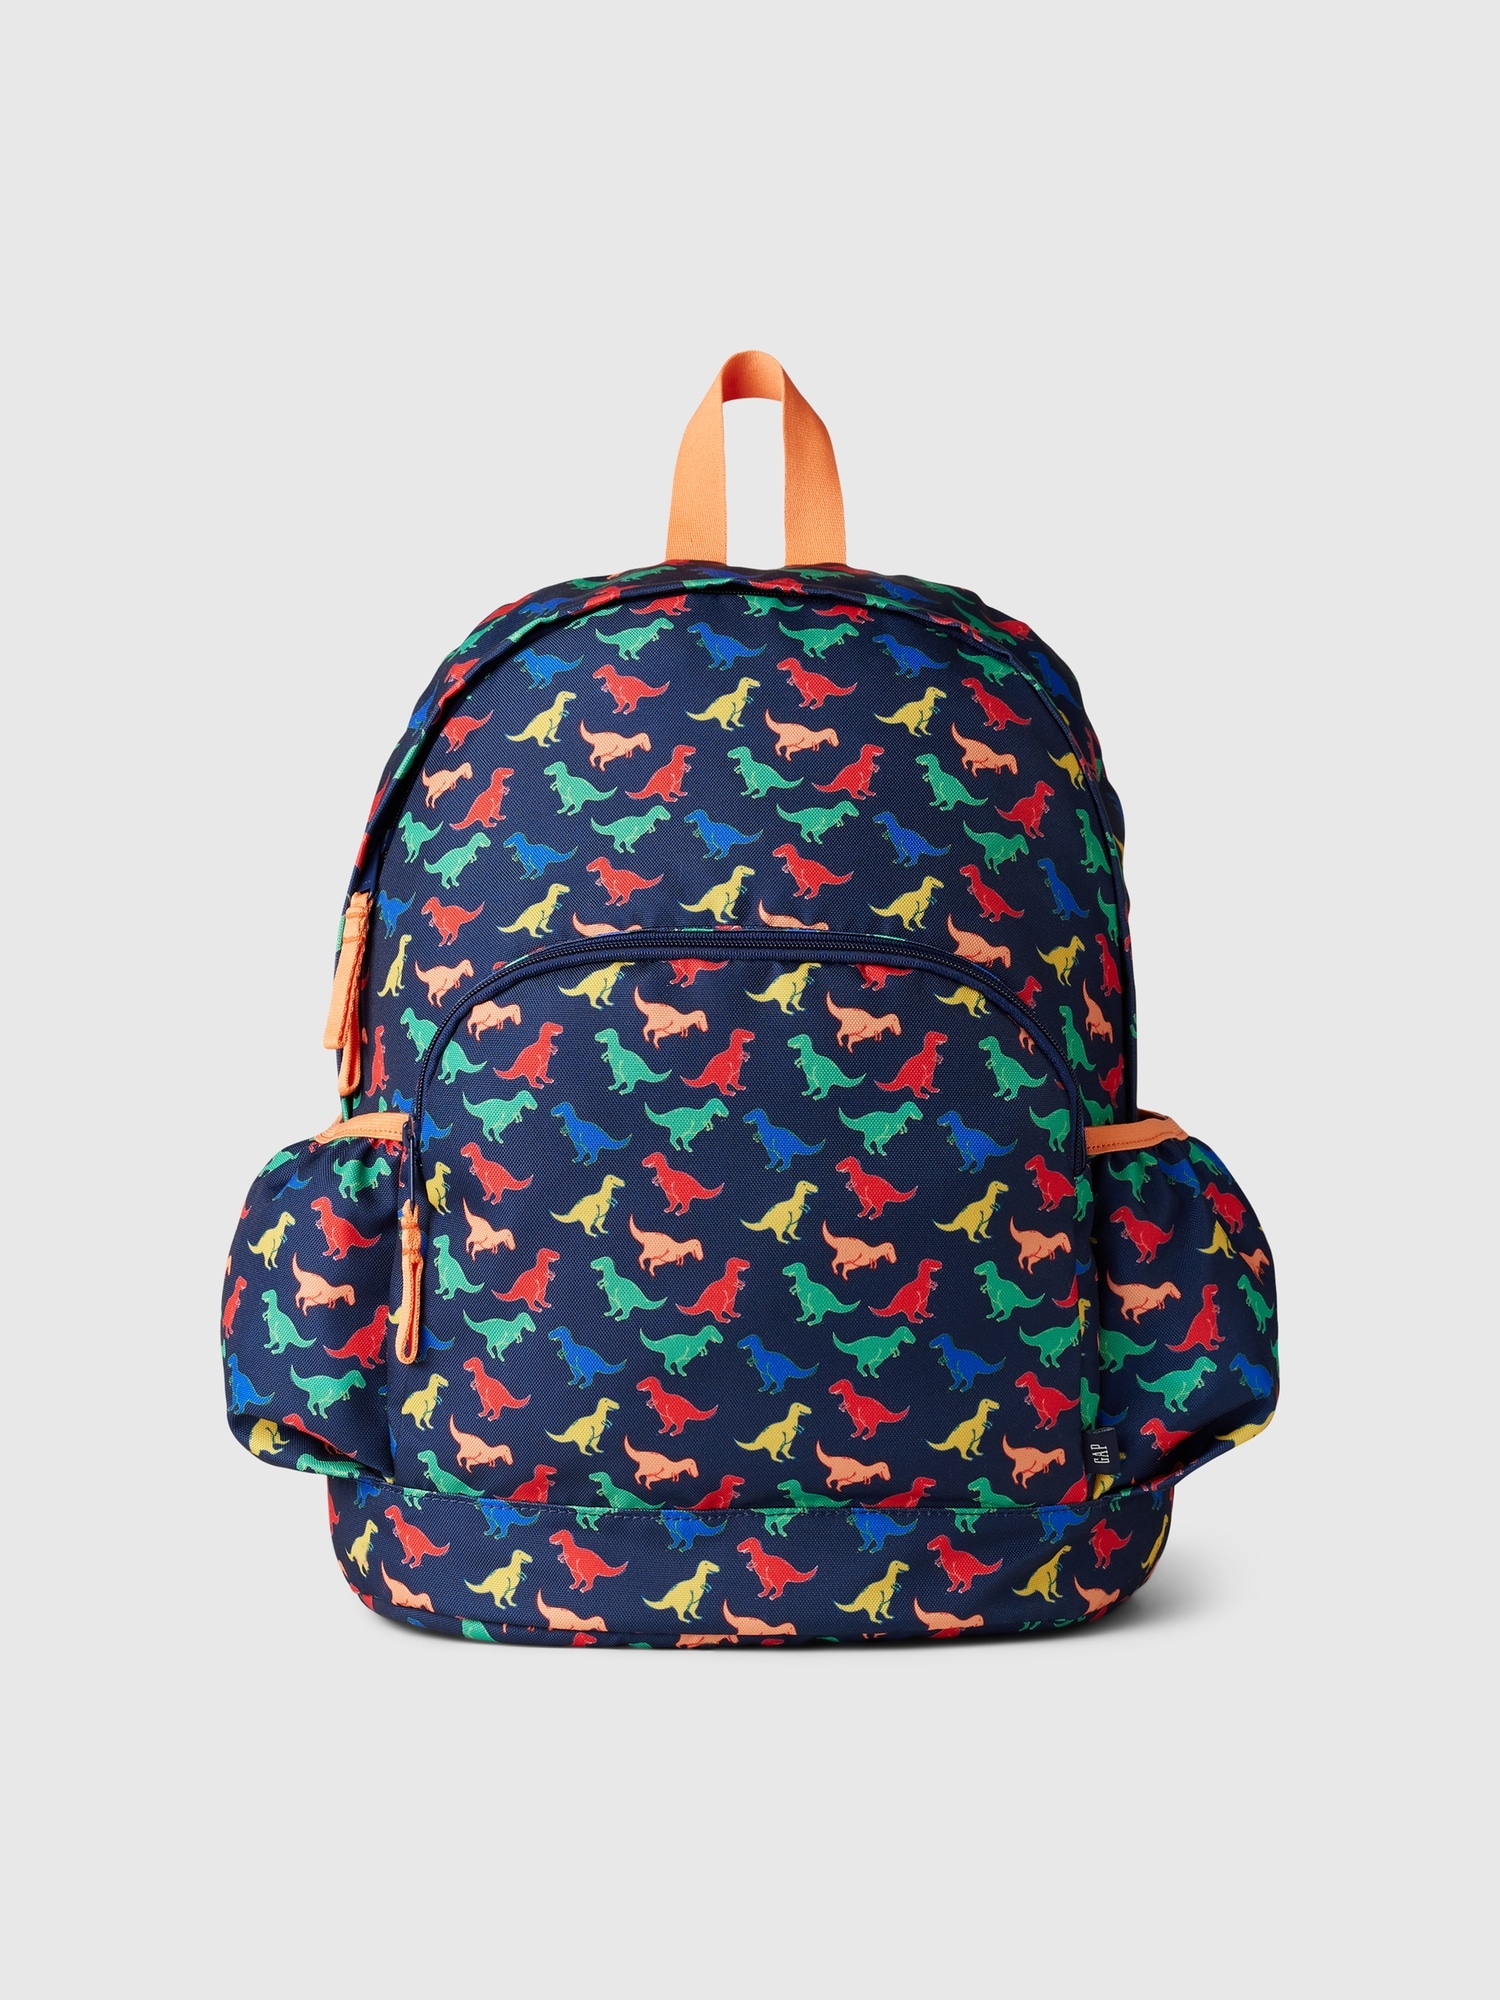 Kids Recycled Dinosaur Backpack